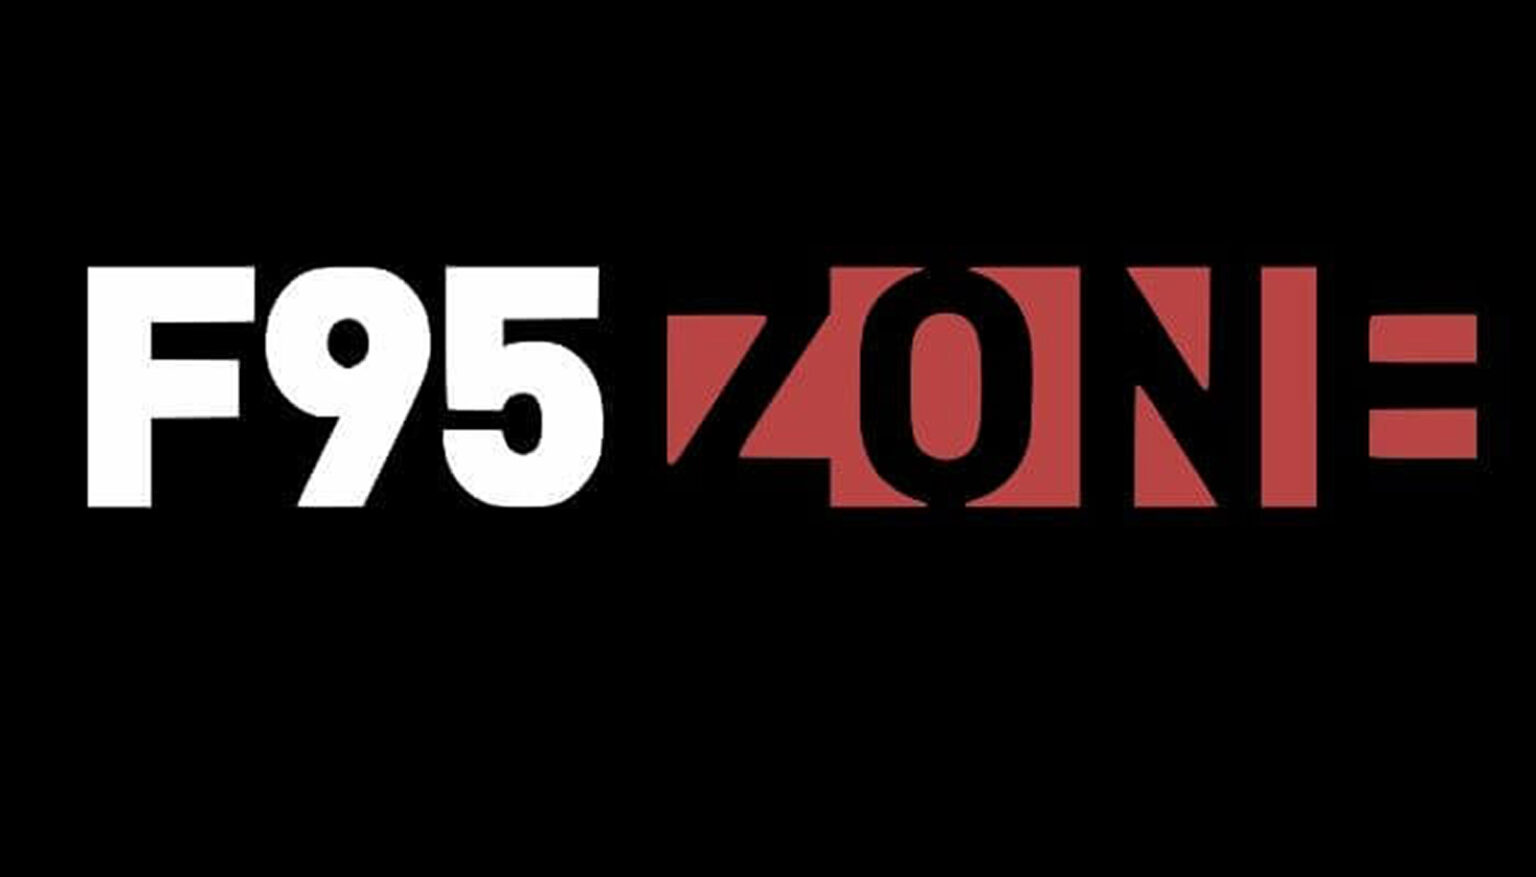 F95 Zone is the ultimate online adult gaming community. Check out the forums and learn about the wildest games on the internet today!